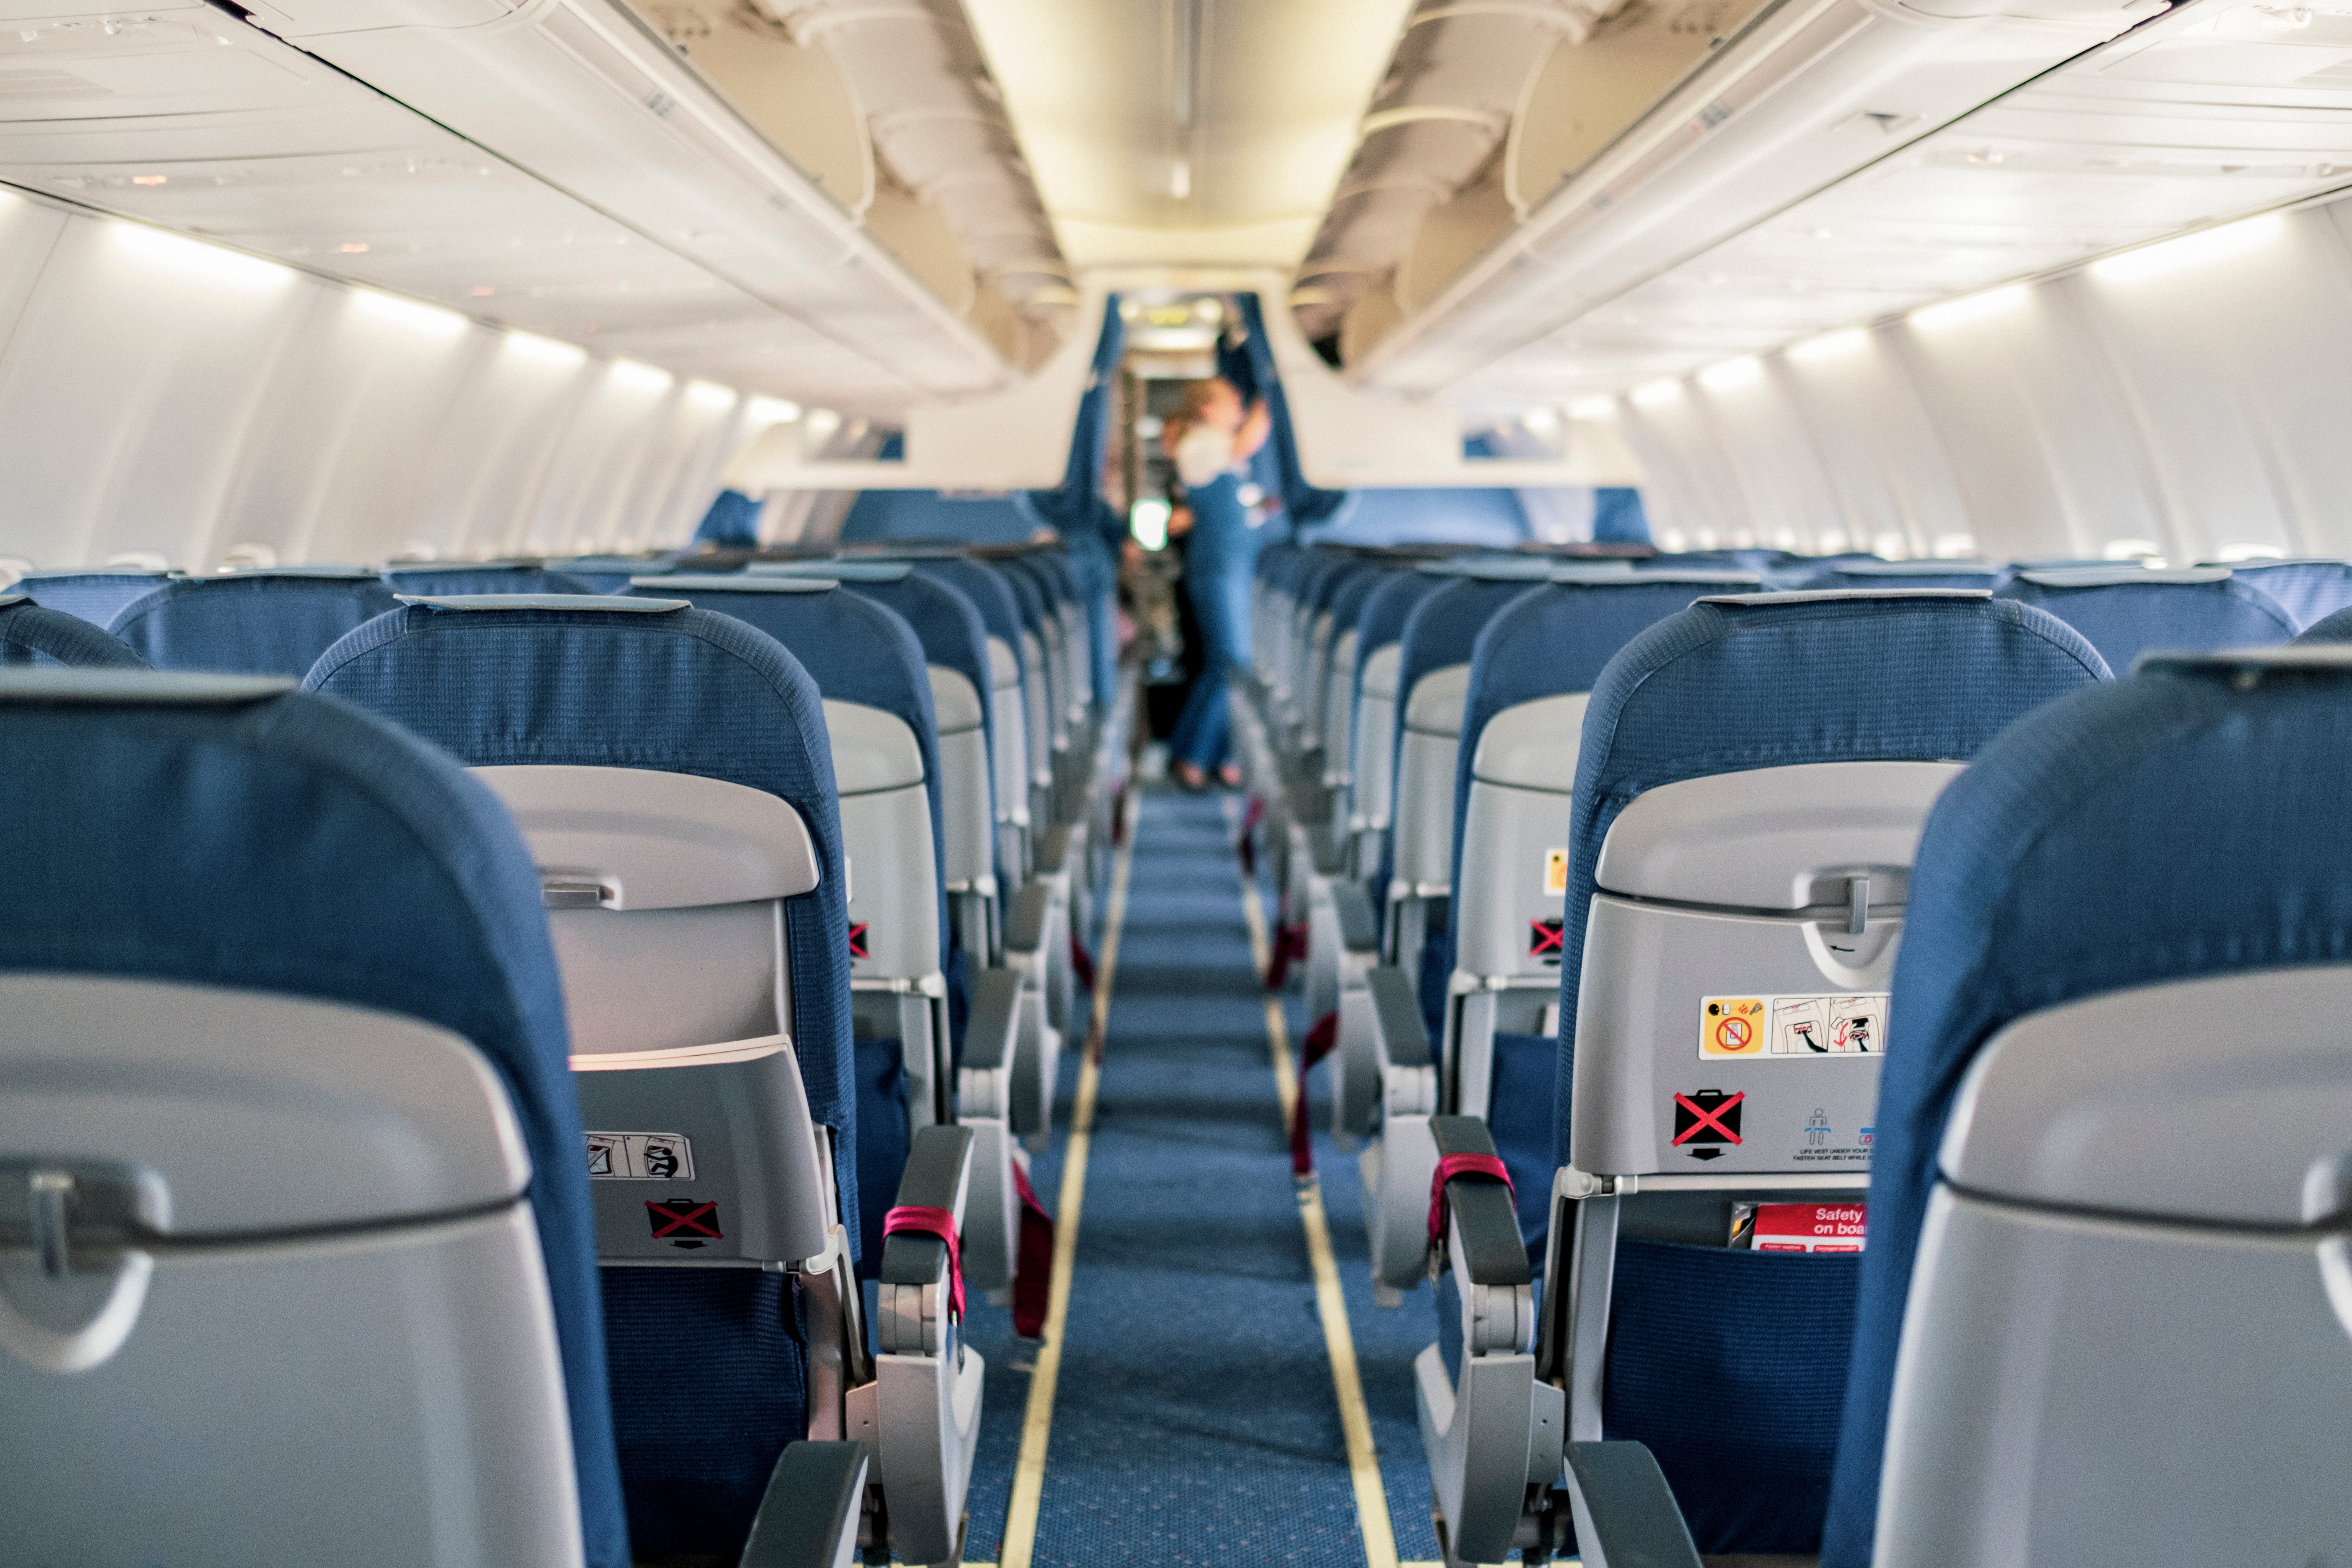 Research published in 2015 examined aircraft data to establish the seat rows linked with the lowest fatality rates